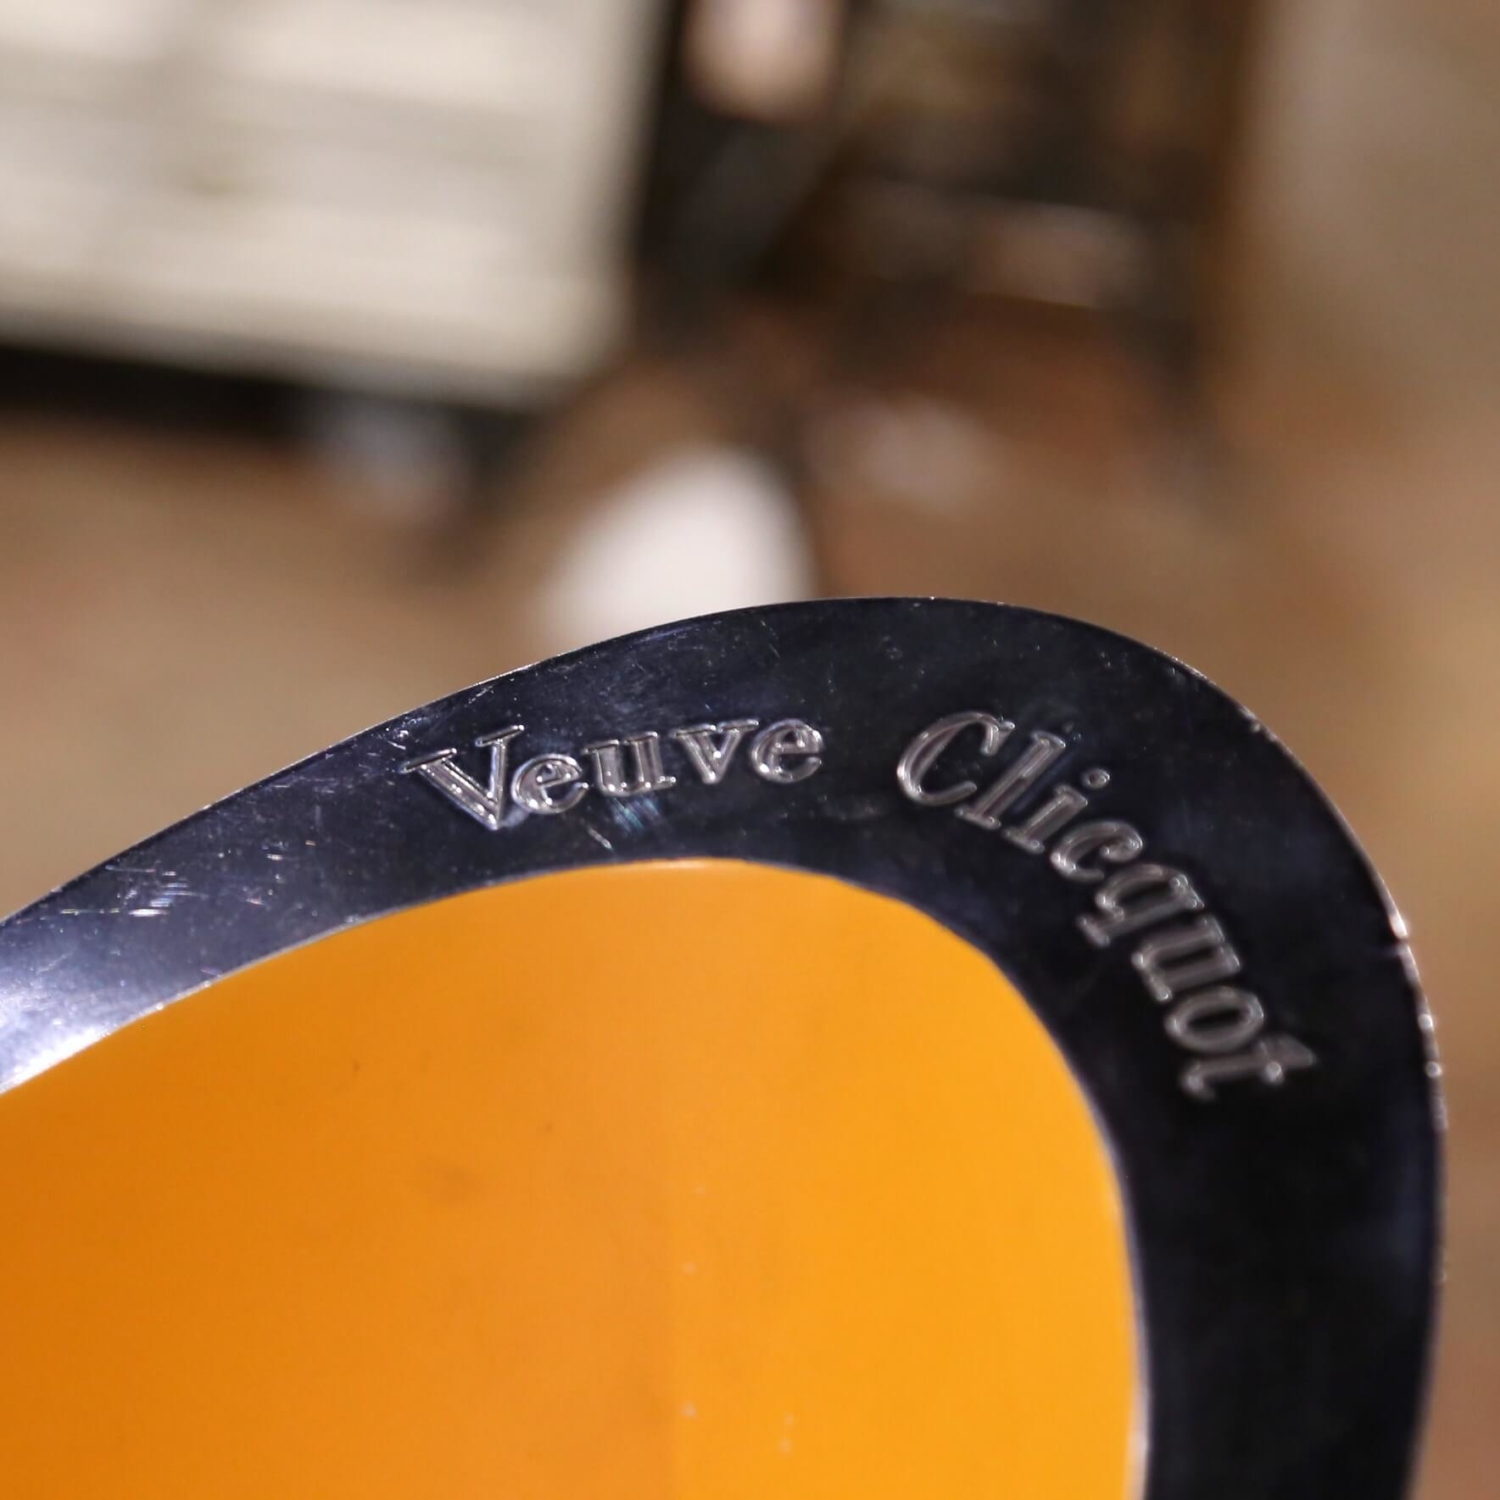 Vintage French Painted Steel Veuve Clicquot Double Magnum